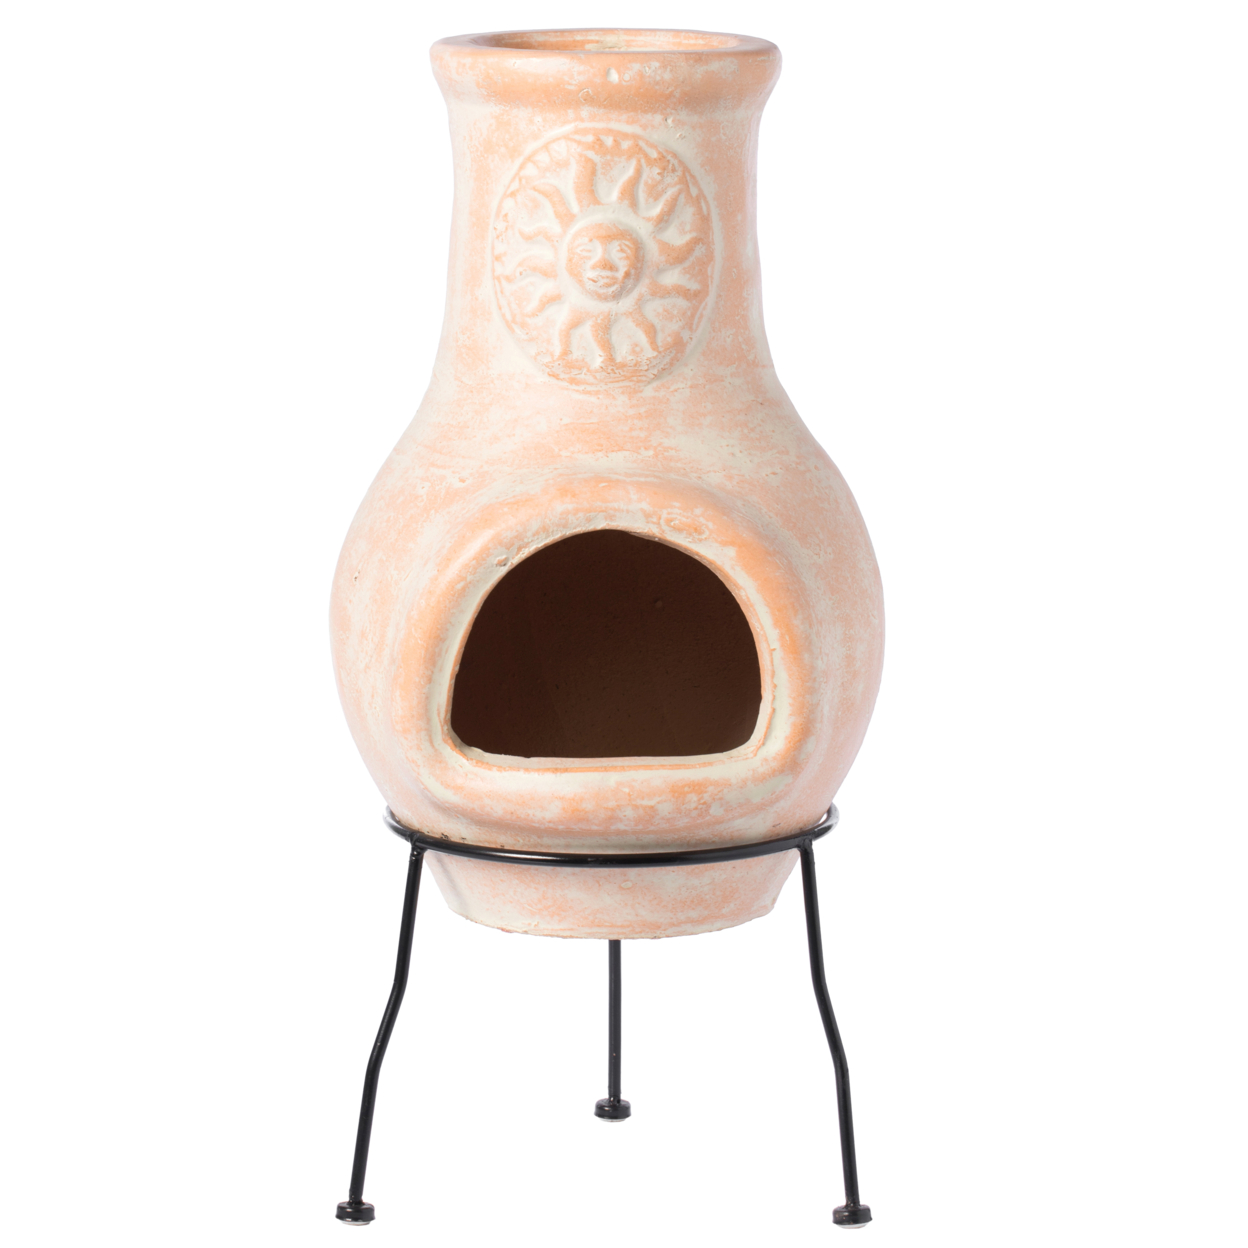 Beige Outdoor Clay Chimney Outdoor Fireplace Sun Design Charcoal Burning Fire Pit With Sturdy Metal Stand, Barbecue, Cocktail Party